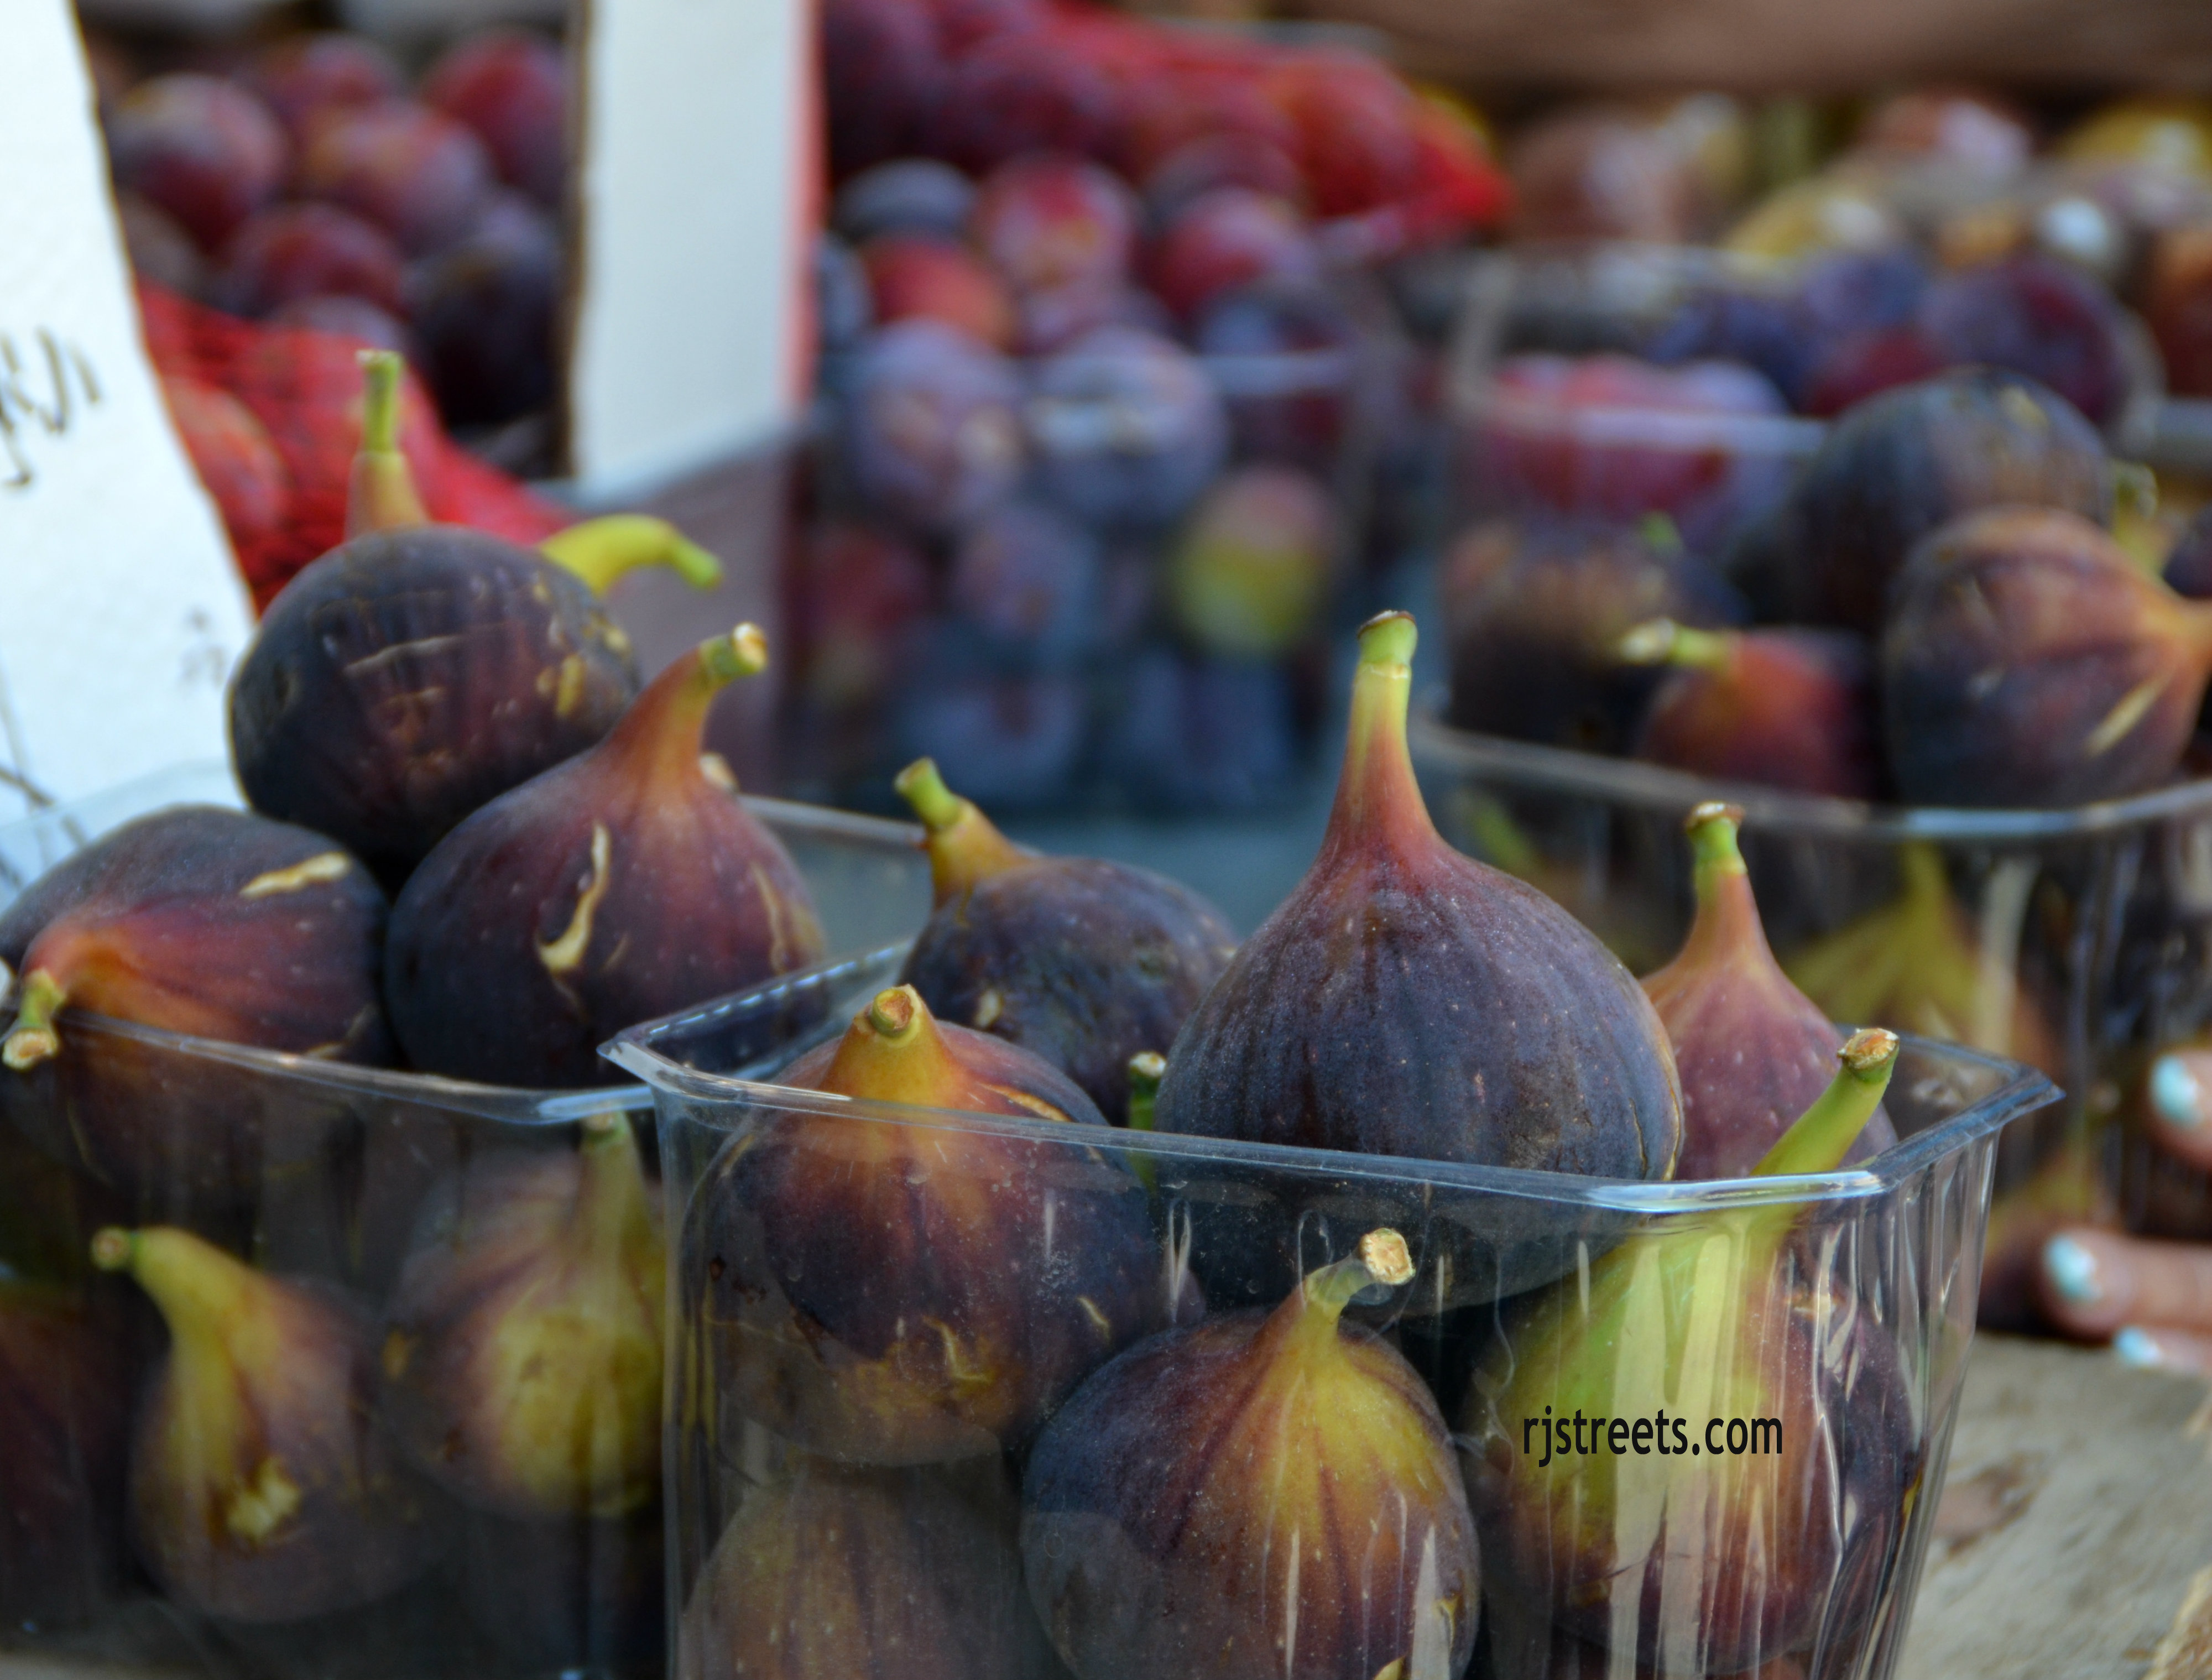 image fresh figs, photo figs, picture fresh fruit